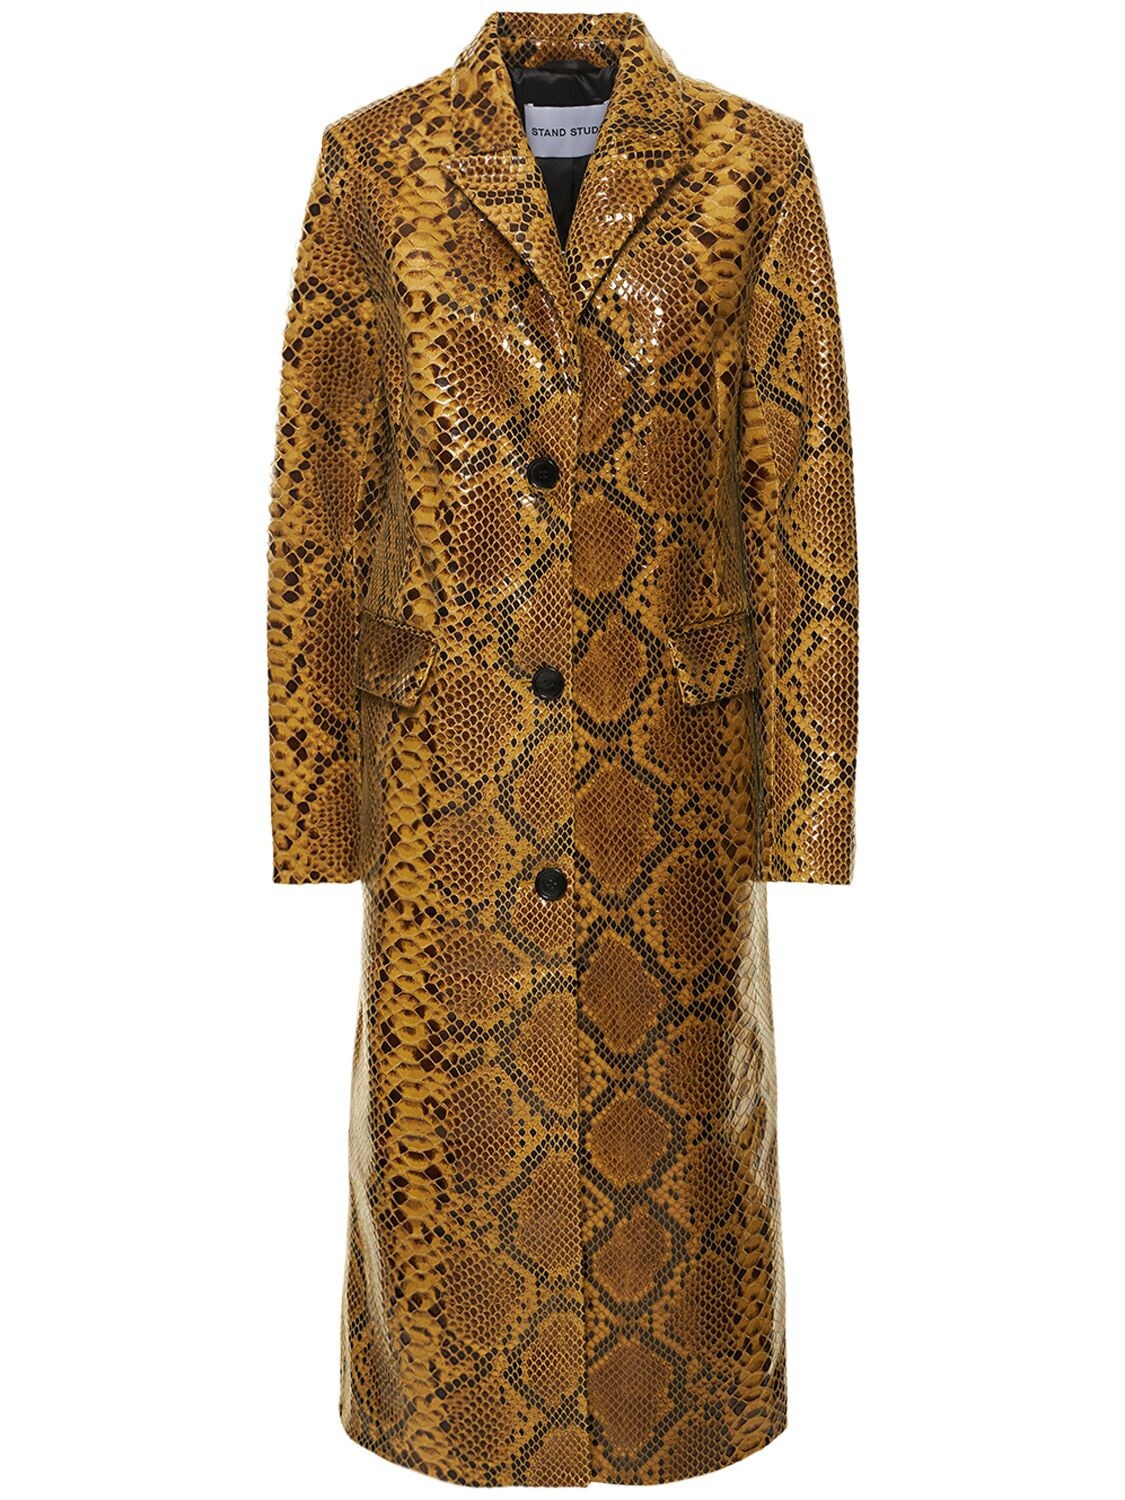 STAND STUDIO ZOIE PRINTED FAUX LEATHER LONG COAT